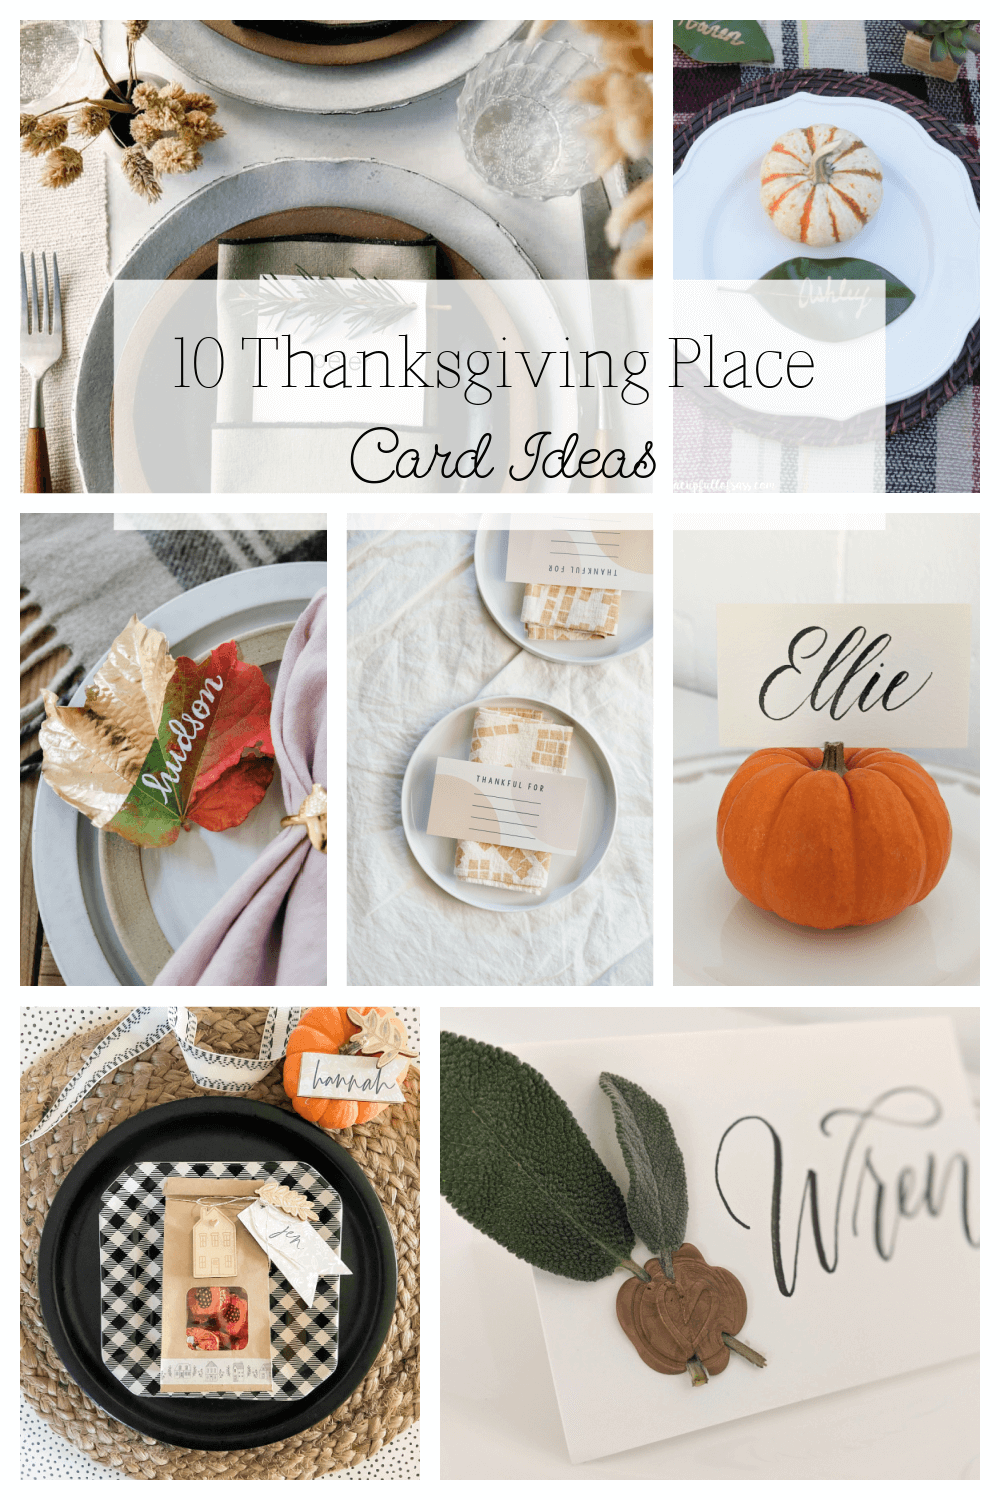 10 Thanksgiving Place Card Ideas